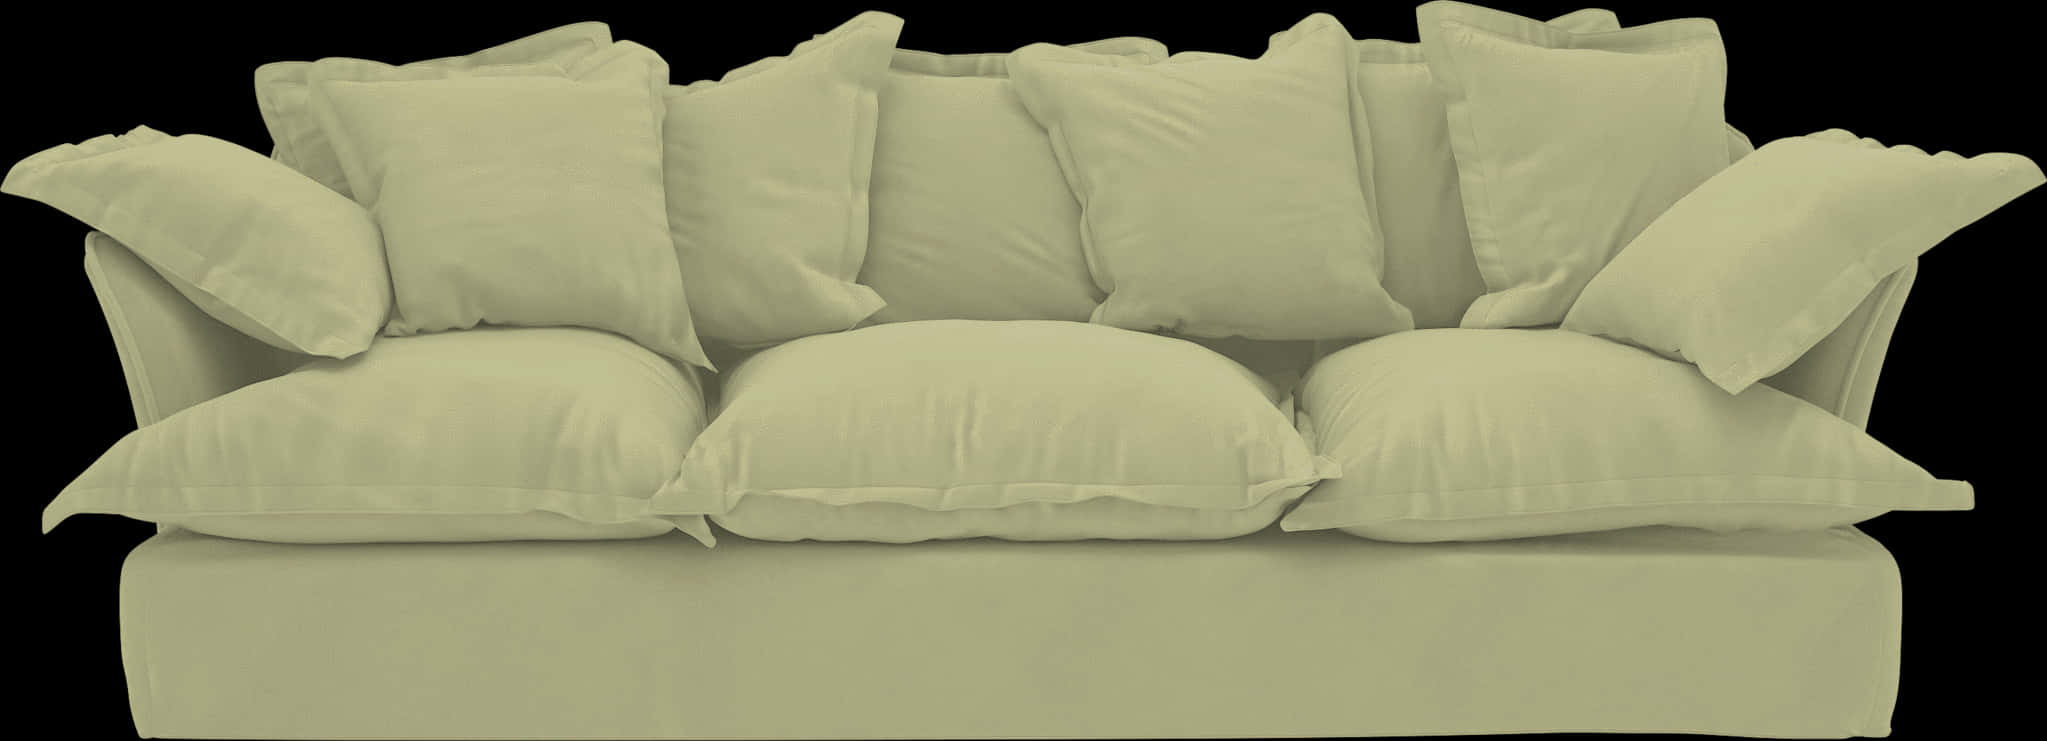 Plush Beige Couch With Pillows